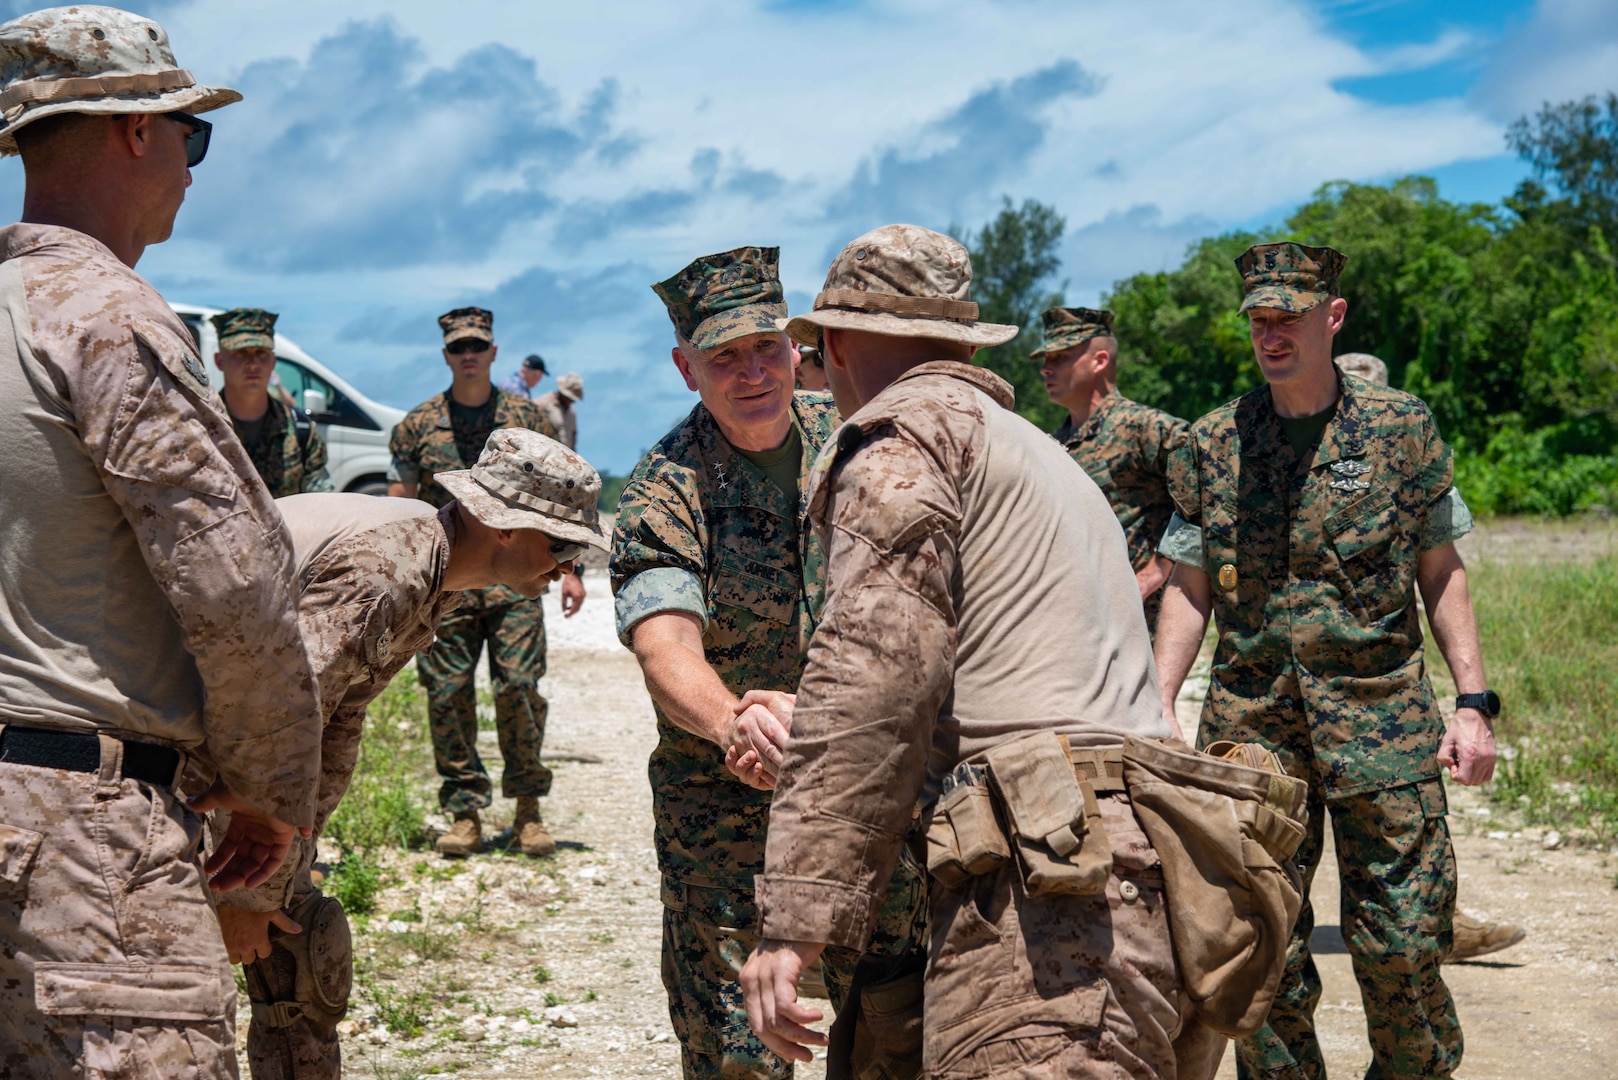 U.S. Marine Corps Lt. Gen. William M. Jurney, commander, U.S. Marine Corps Forces, Pacific, meets explosive ordnance disposal technicians with the Marine Corps Engineer Detachment-Palau 24.1 at the construction site for the Peleliu Airfield, Apr. 25. Jurney traveled to Palau to meet with local and military leaders to discuss regional defense partnerships and opportunities. Palau is one of the Compact of Free Association states aligned with the United States, which provides defense, funding, and access to social services. (U.S. Navy photo by Mass Communication Specialist 1st Class Samantha Jetzer)